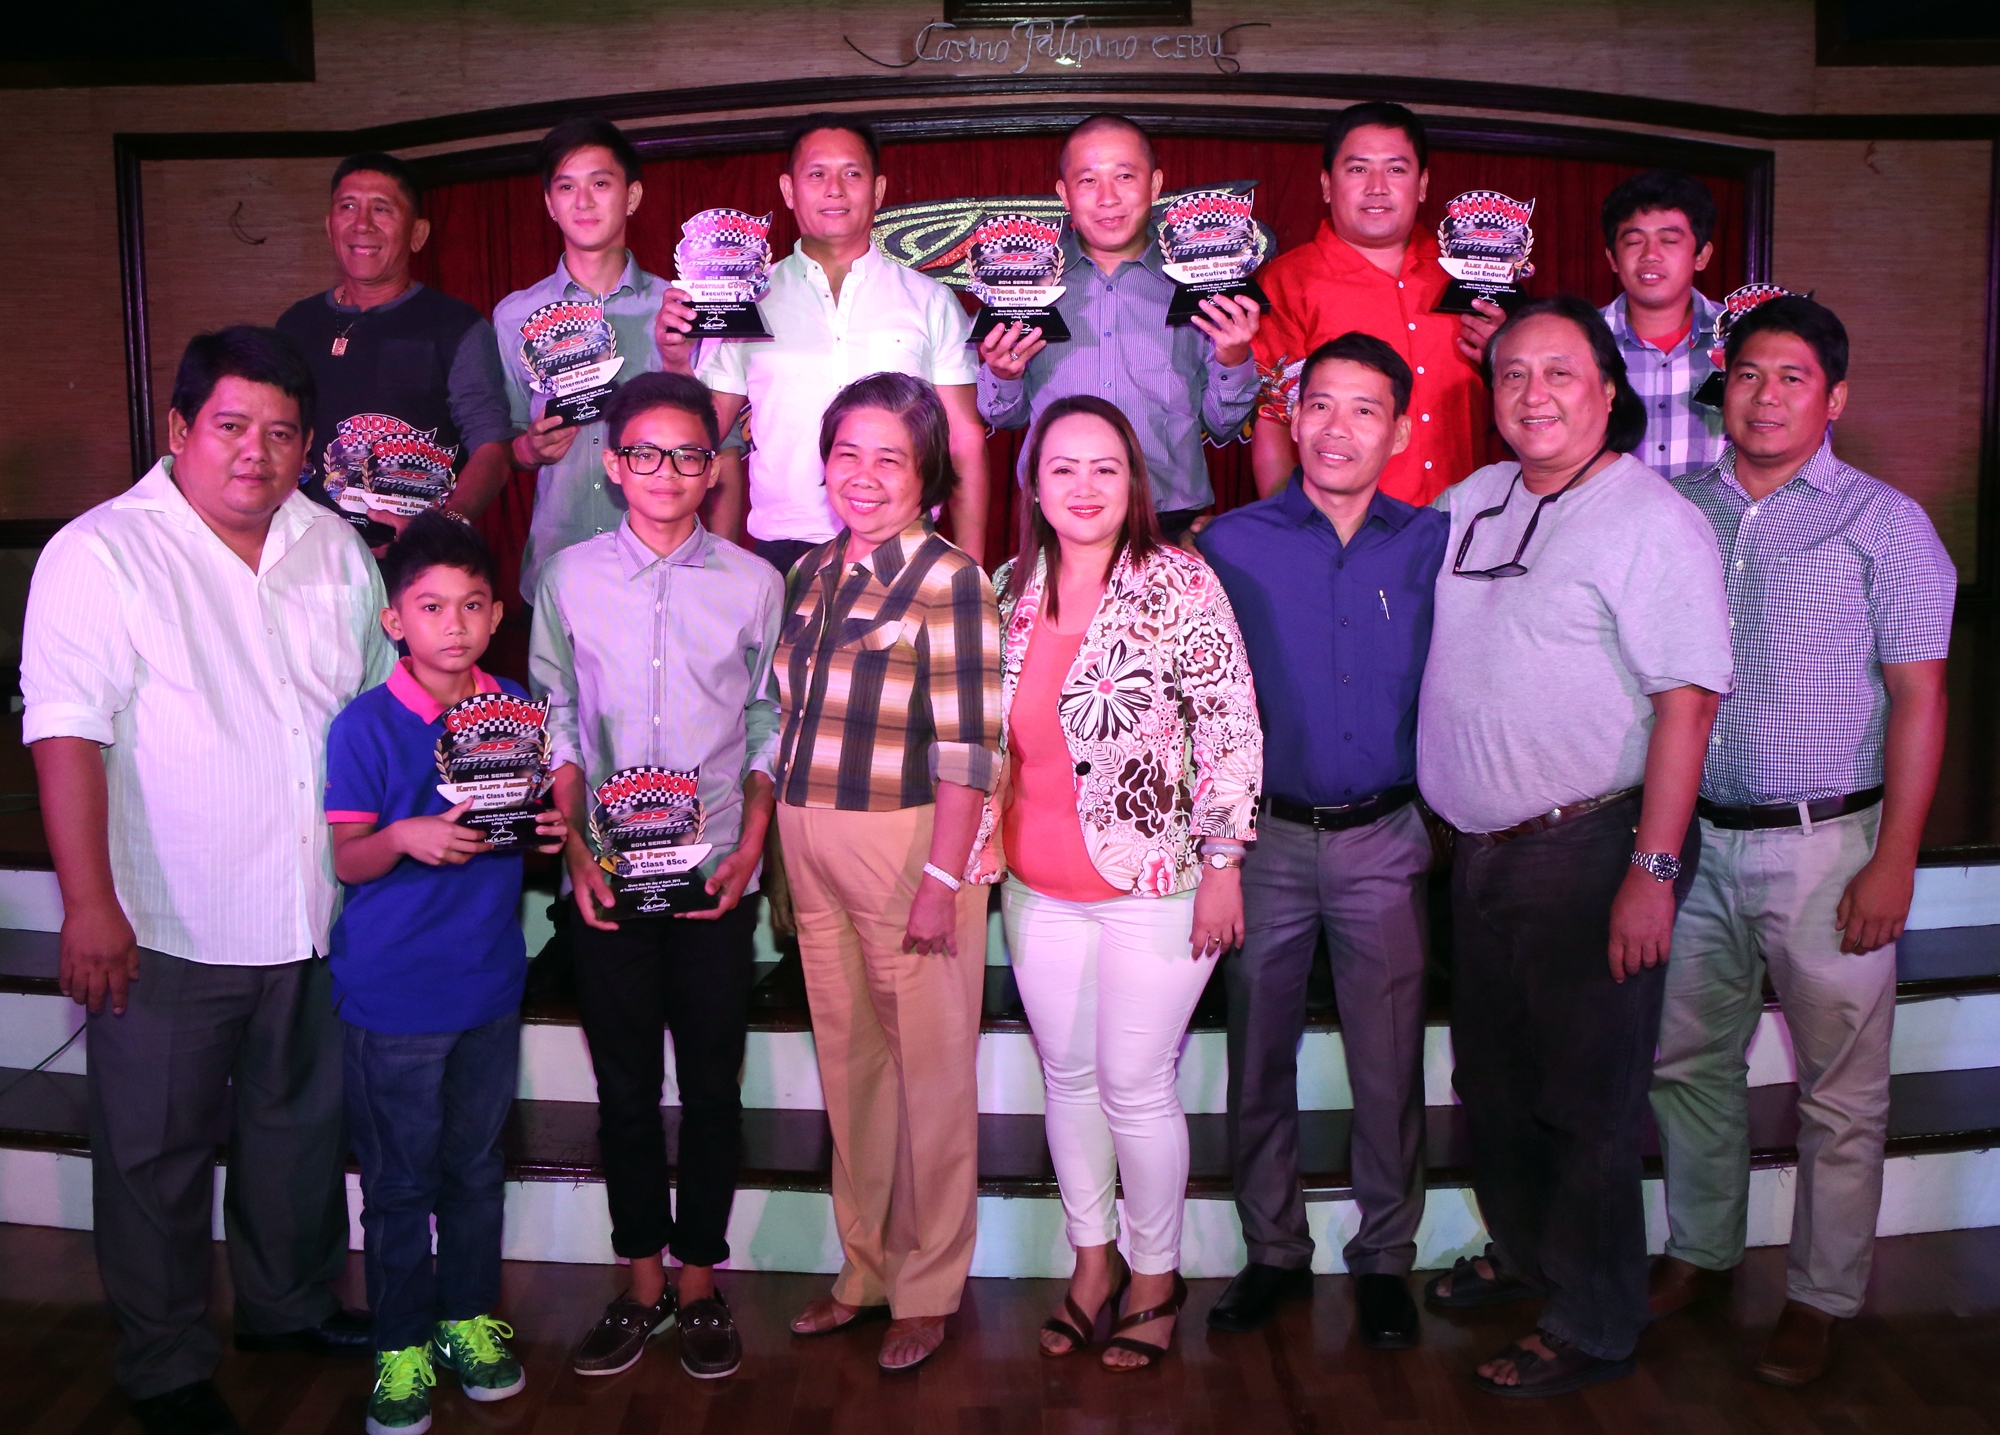 Lou Ornopia (3rd from right), organizer of MS Motosuit Motocross Series, joins the awardees and guests during the Awards Night at PAGCOR’s Teatro Casino at the Waterfront Cebu City Hotel and Casino last Saturday night. (CDN PHOTO/LITO TECSON)